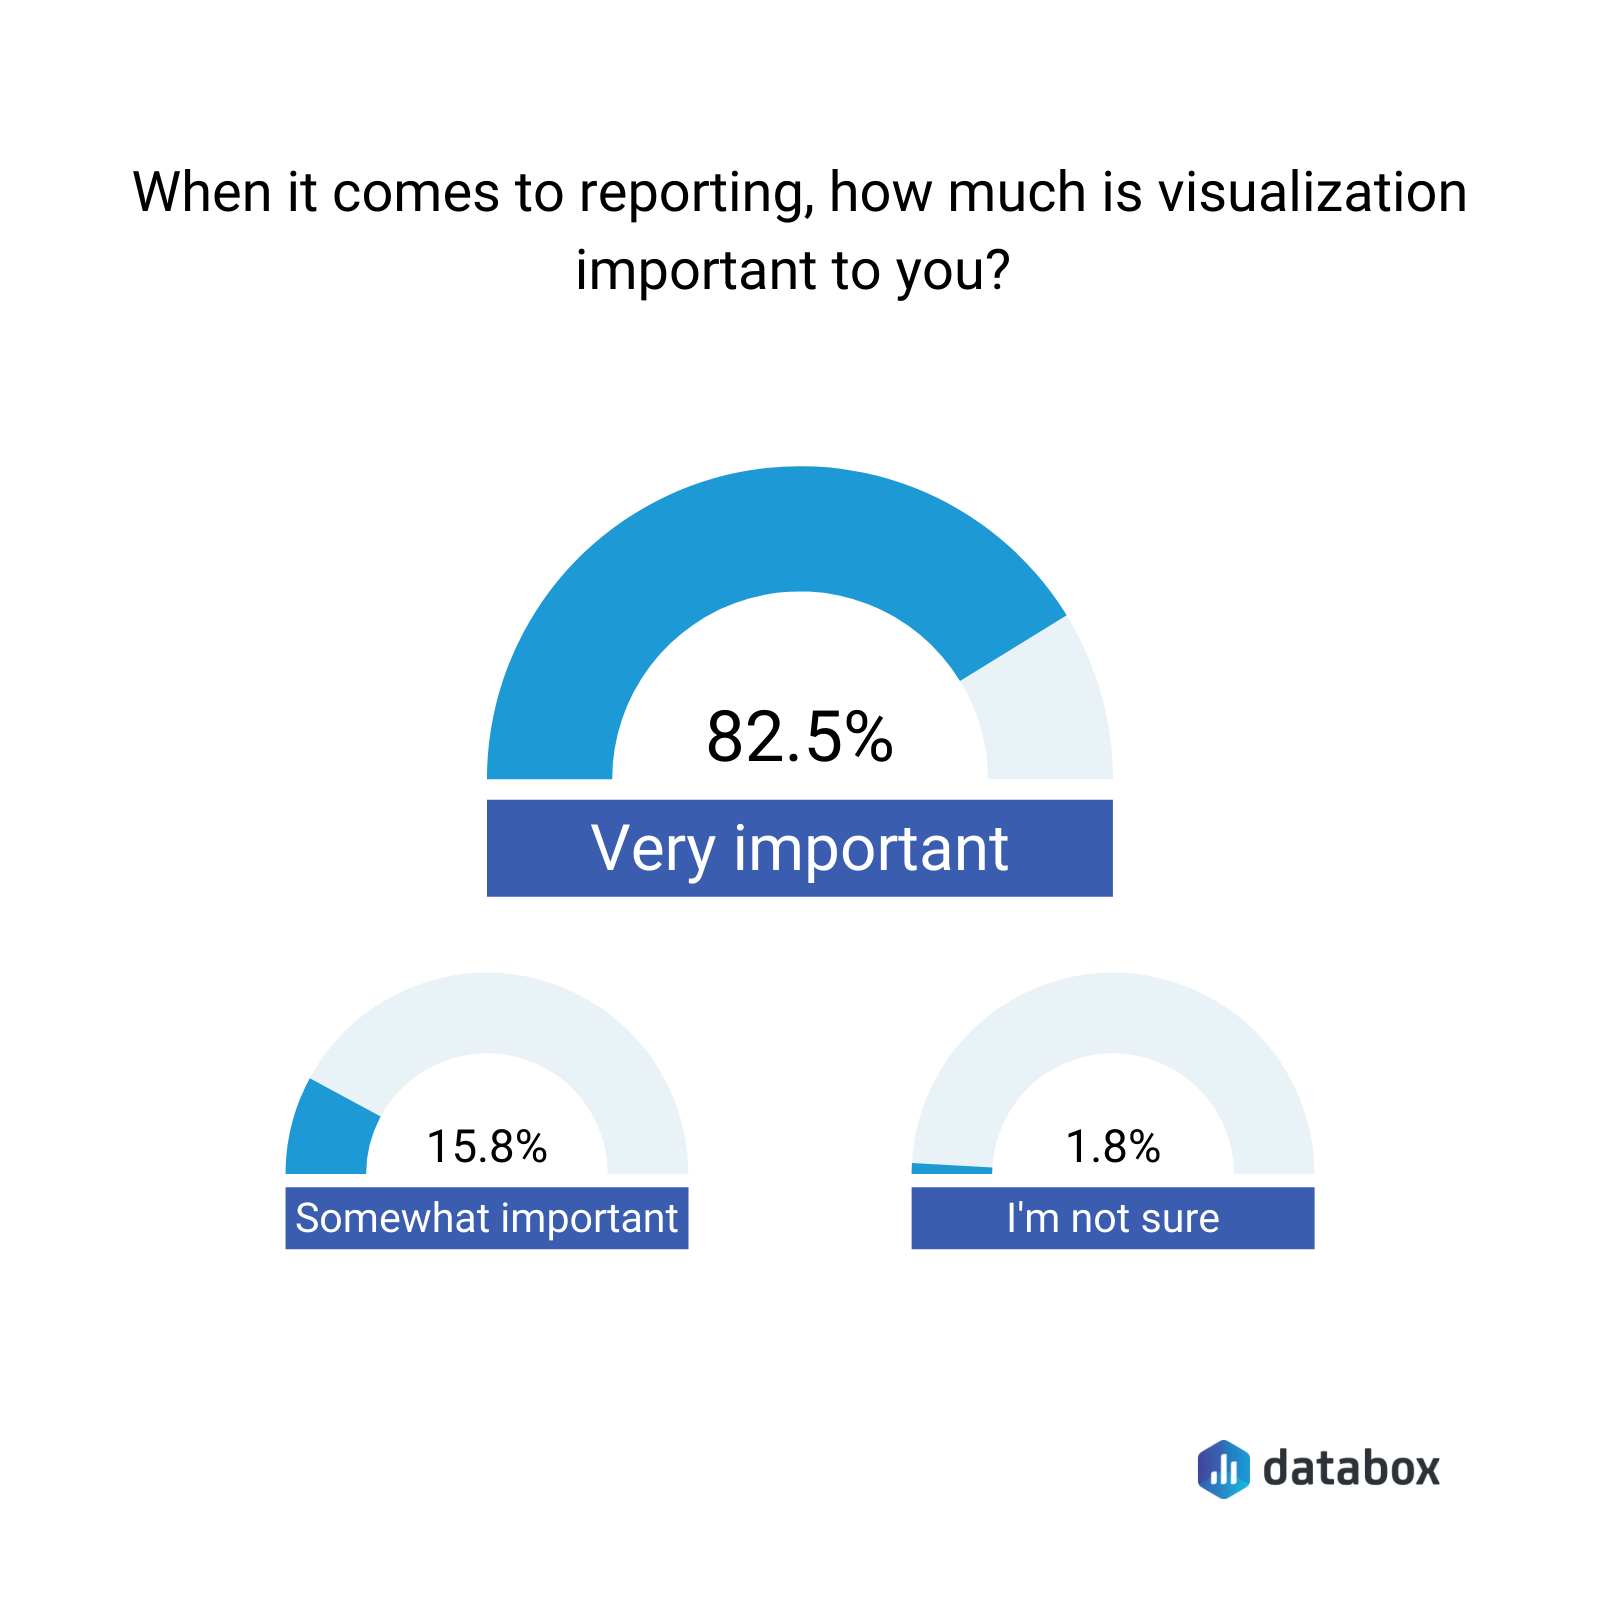 when it comes to reporting, how much is visualization important for you? 